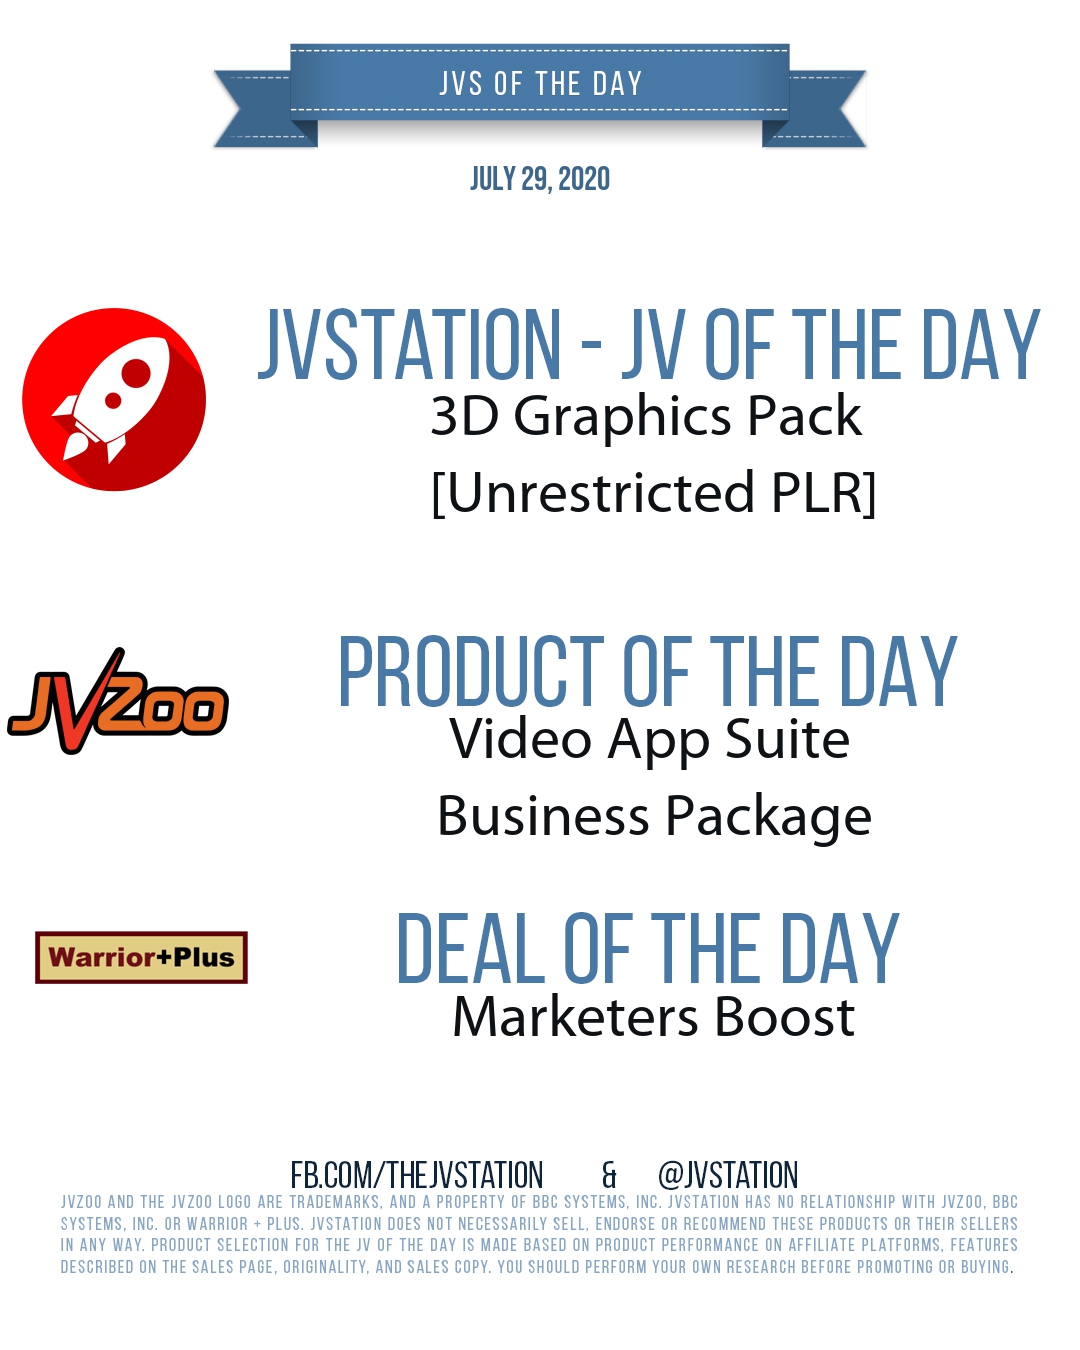 JVs of the day - July 29, 2020